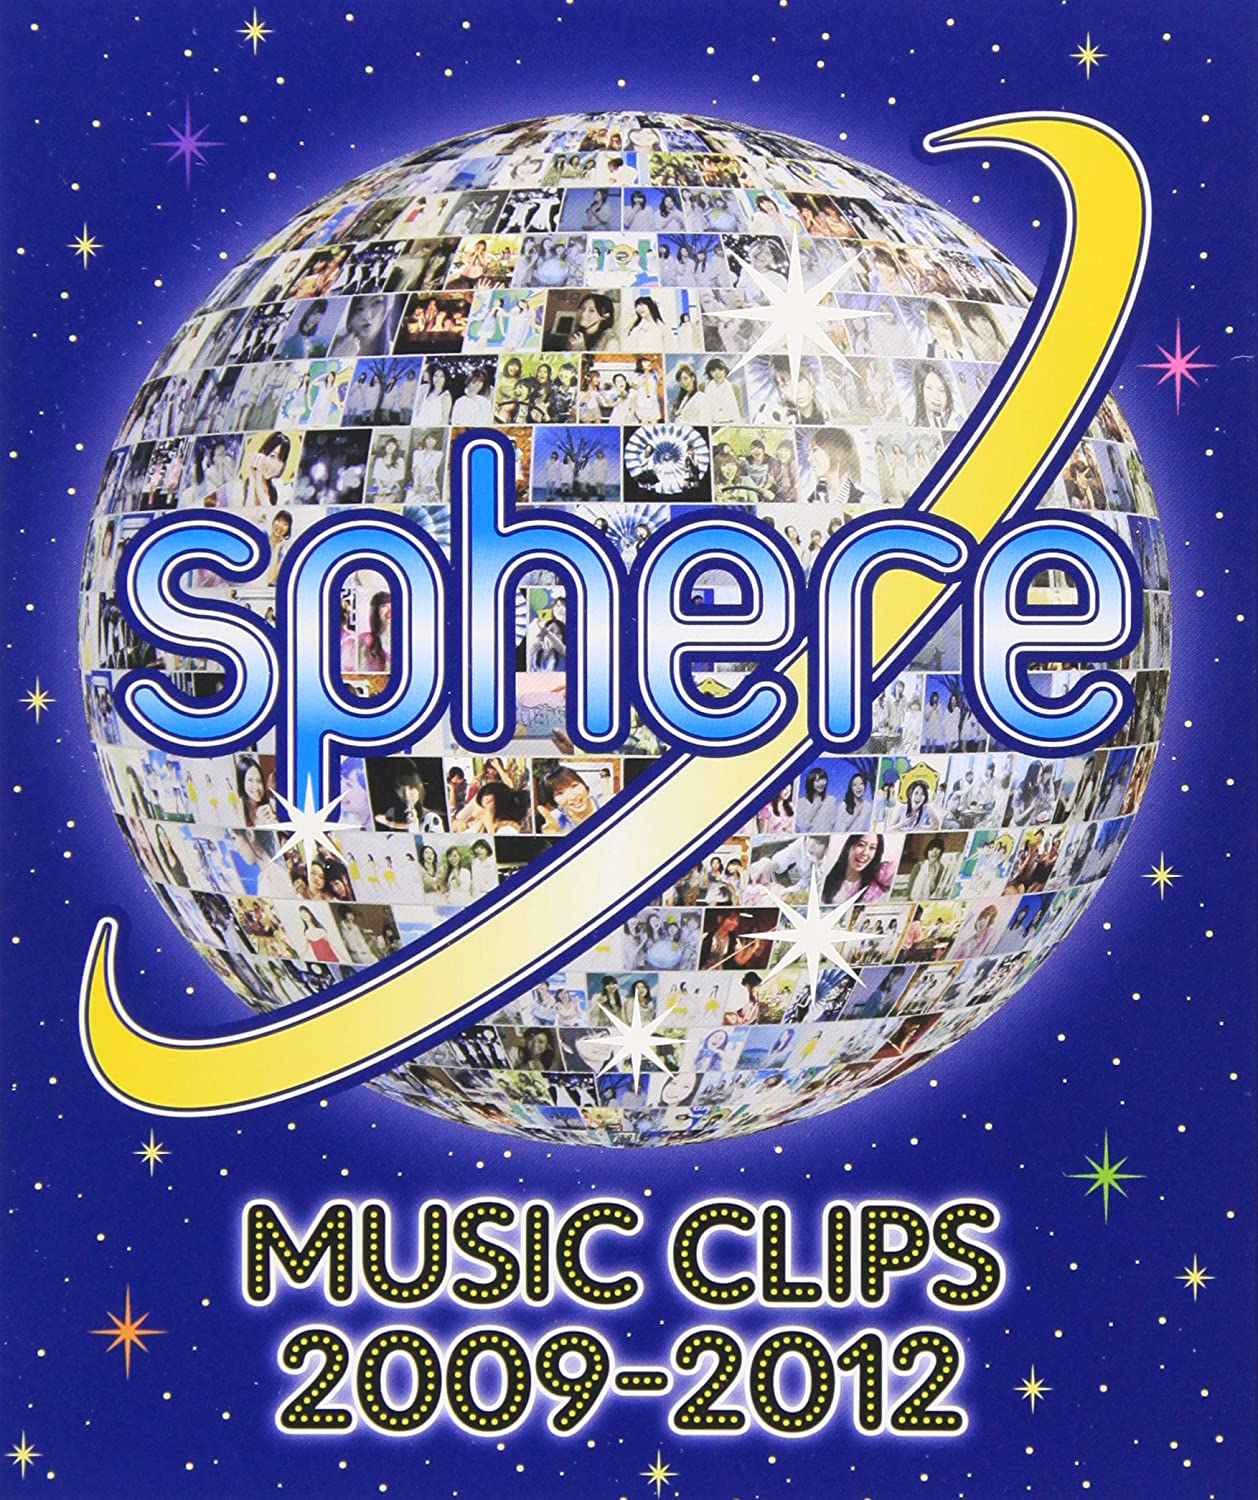 Sphere Music Clips 2009-2012